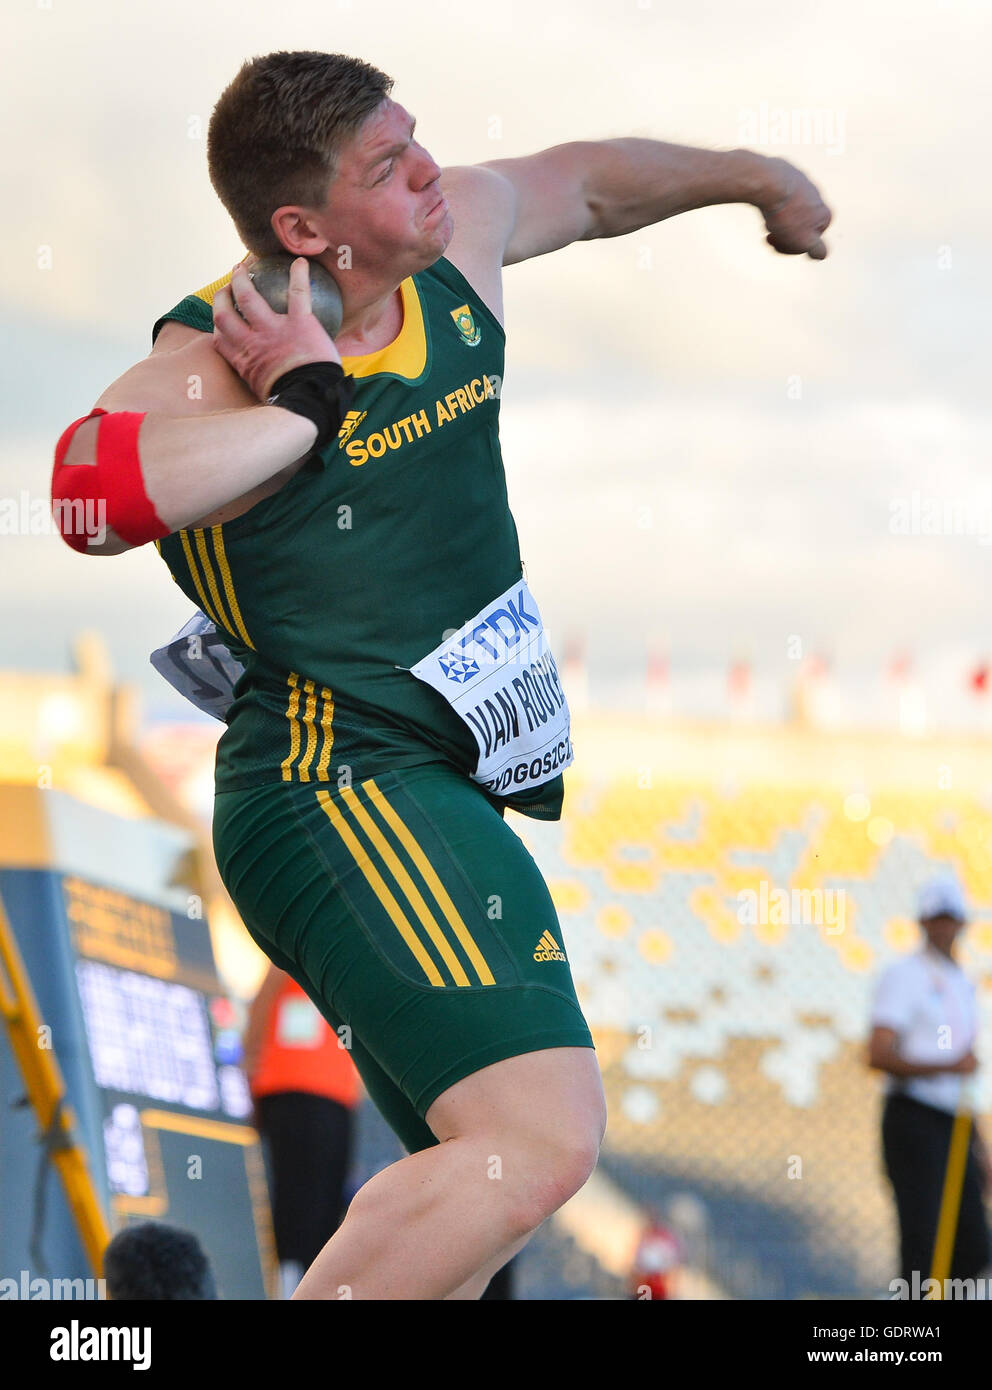 Bydgoszcz, Poland. 19th July, 2016. Jason van Rooyen of South Africa in the  final of the mens shot put during the afternoon session on day 1 of the  IAAF World Junior Championships